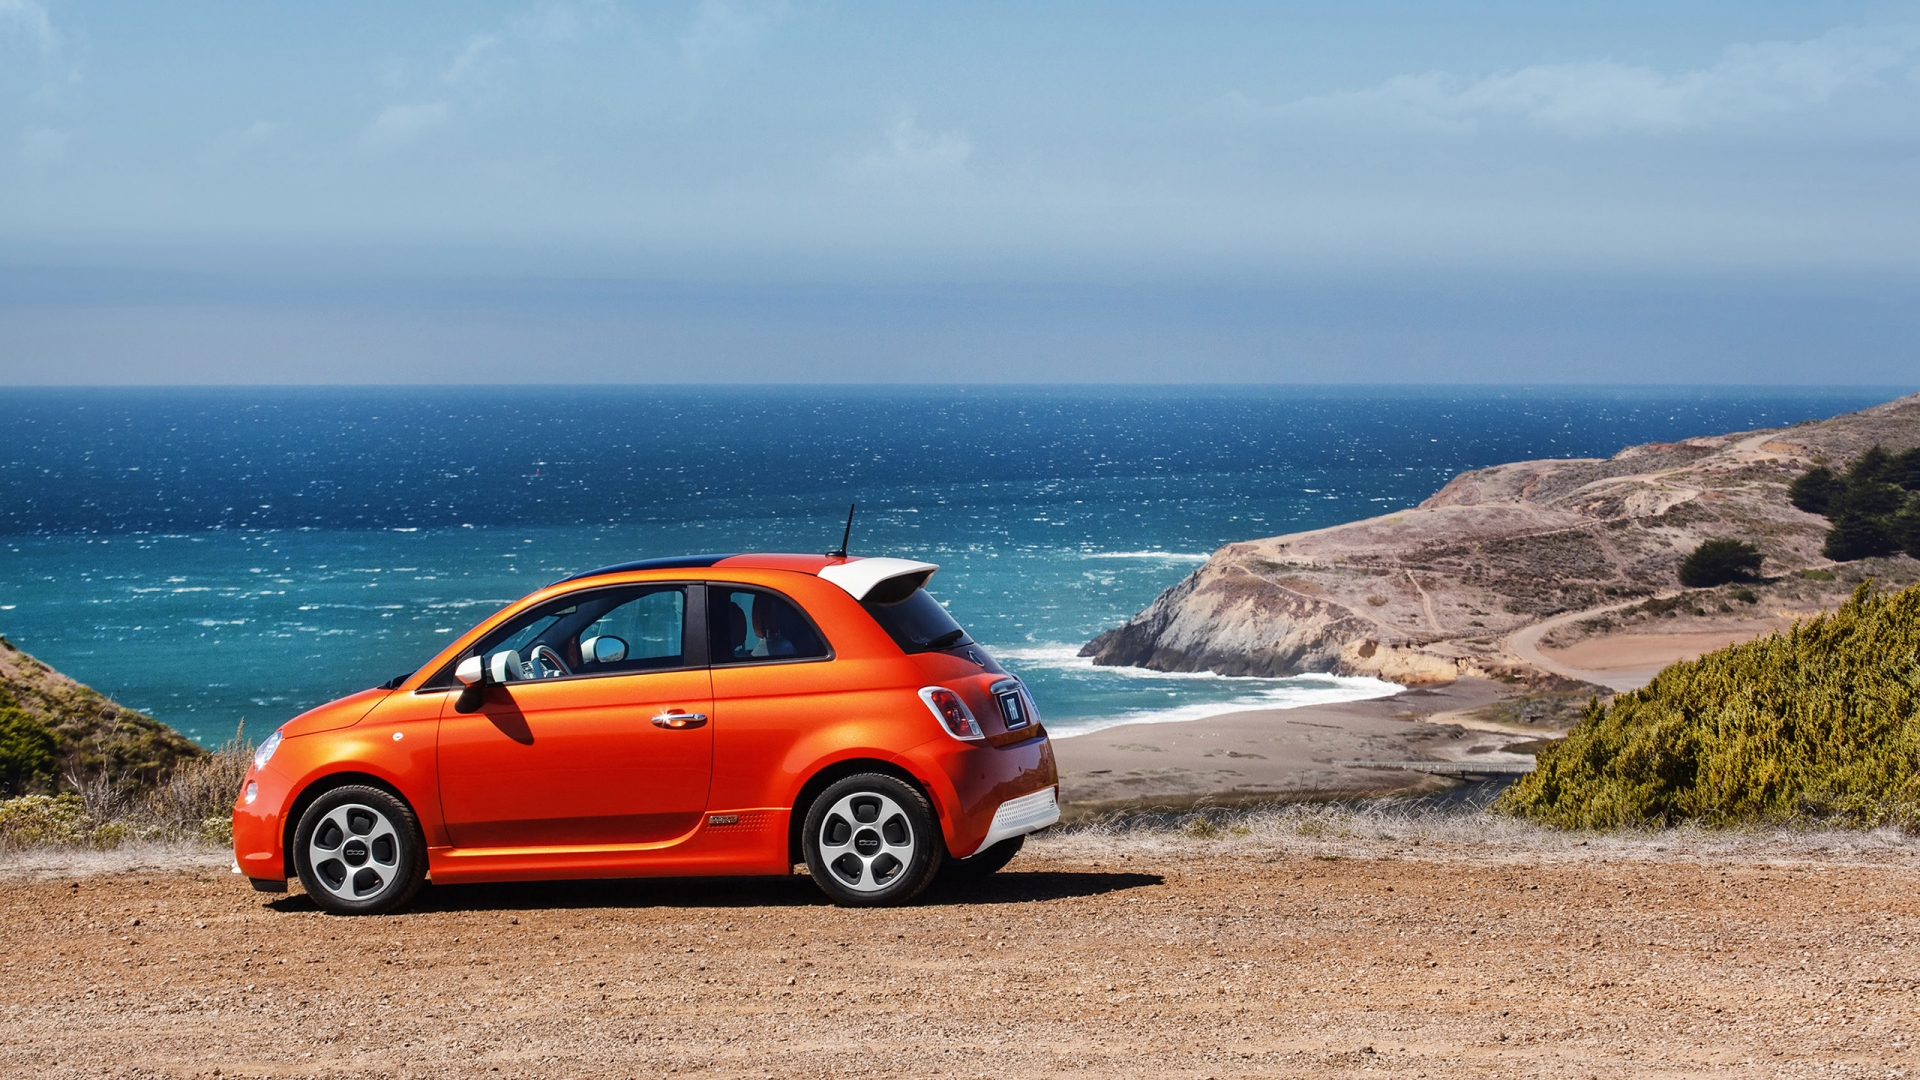 Fiat 500 at Sea for 1920 x 1080 HDTV 1080p resolution